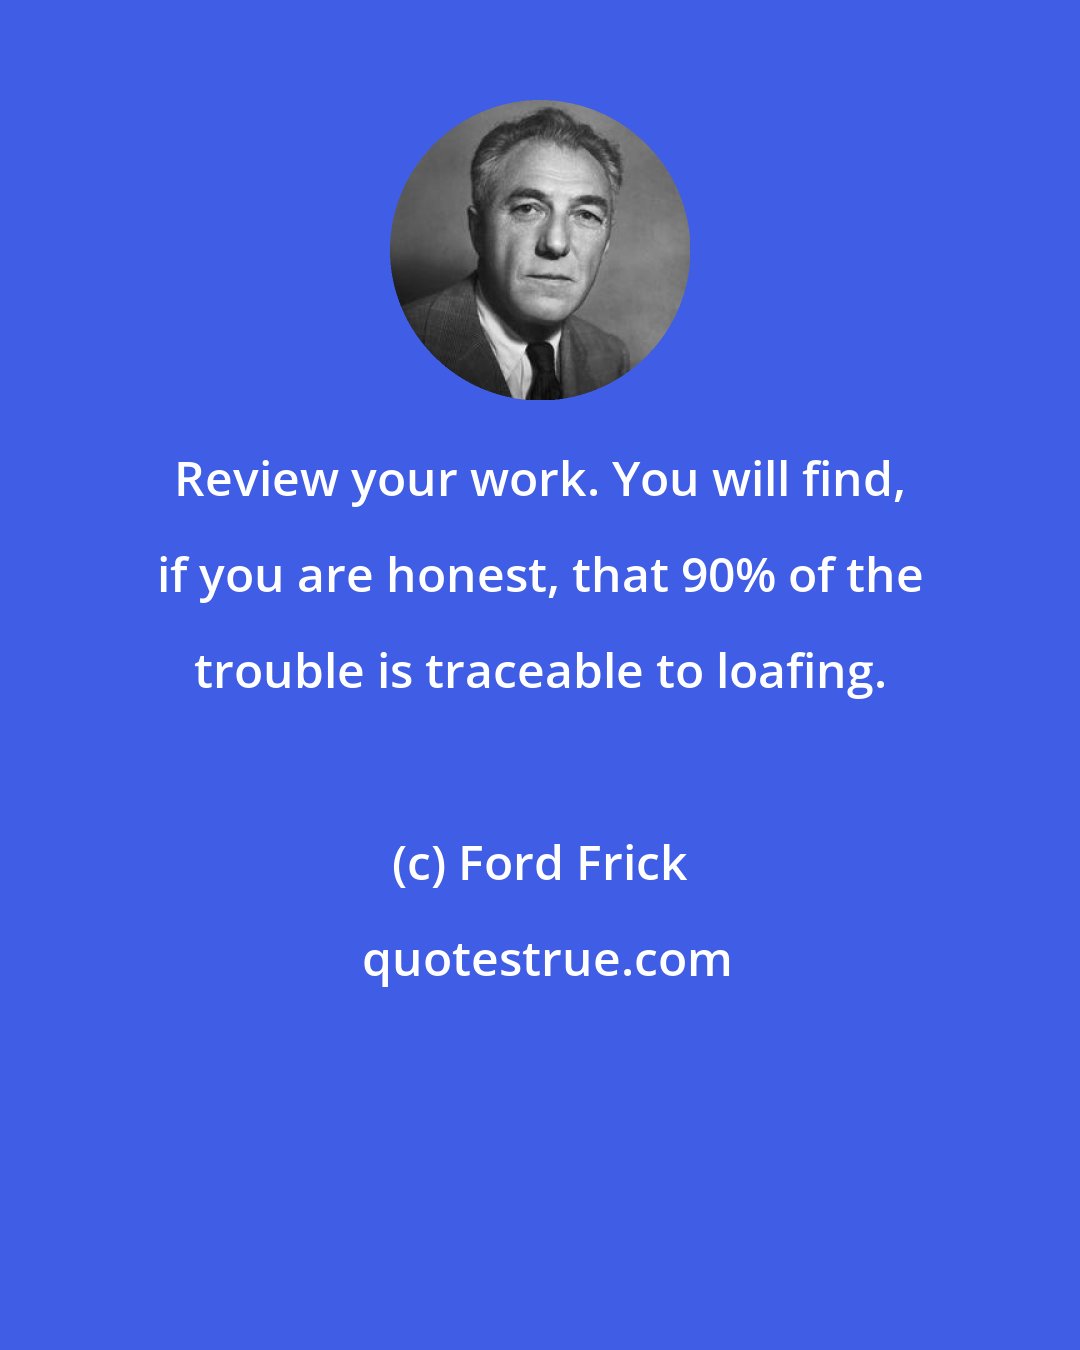 Ford Frick: Review your work. You will find, if you are honest, that 90% of the trouble is traceable to loafing.